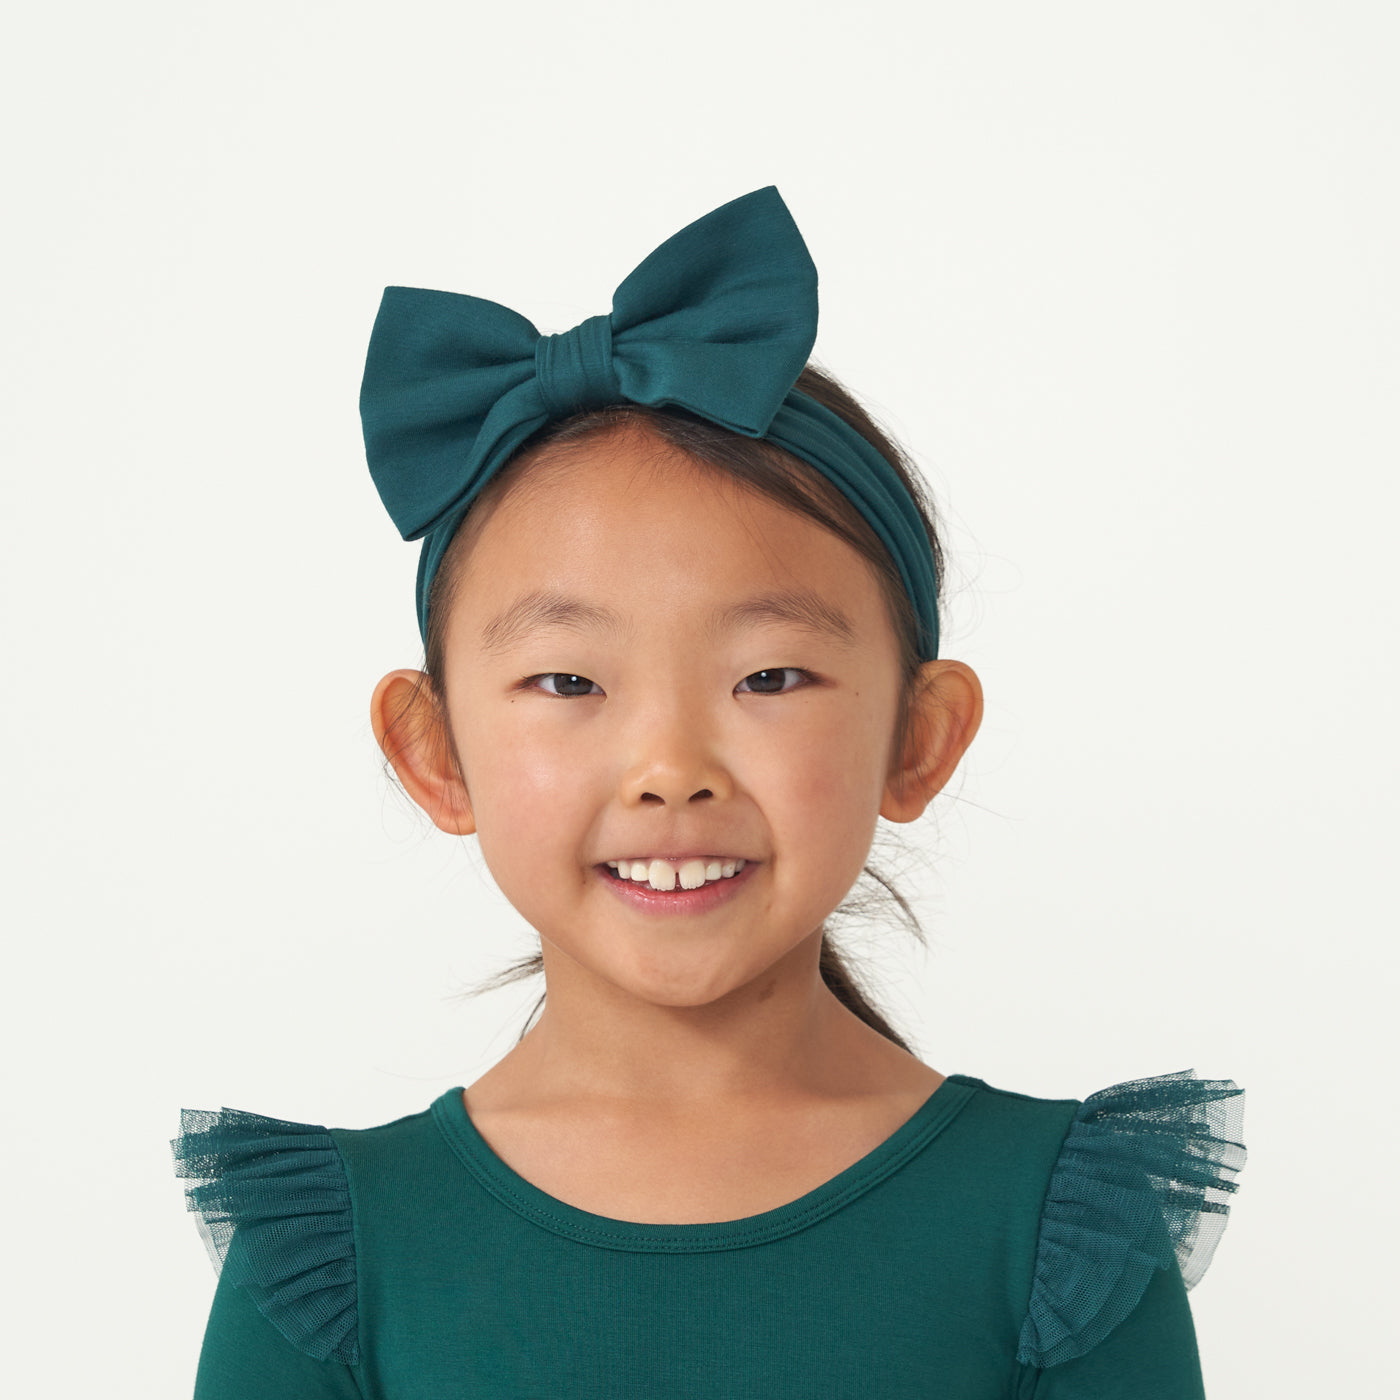 Child wearing an Emerald flutter tutu dress paired with an Emerald luxe bow headband